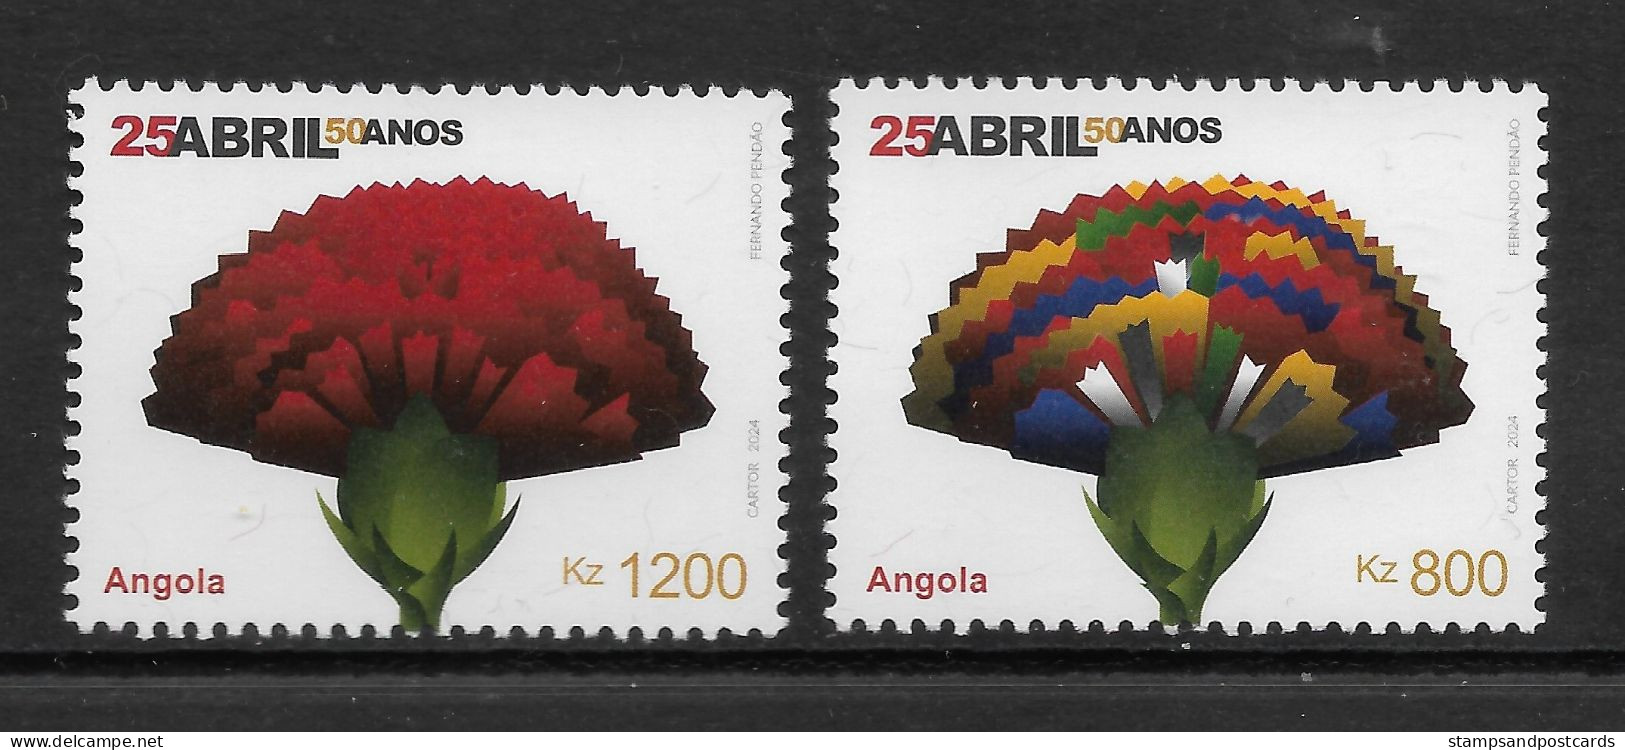 Angola 2024 Emission Commune Joint Issue Portugal 25 Avril Revolution Des Oeillets Carnation Revolution - Joint Issues